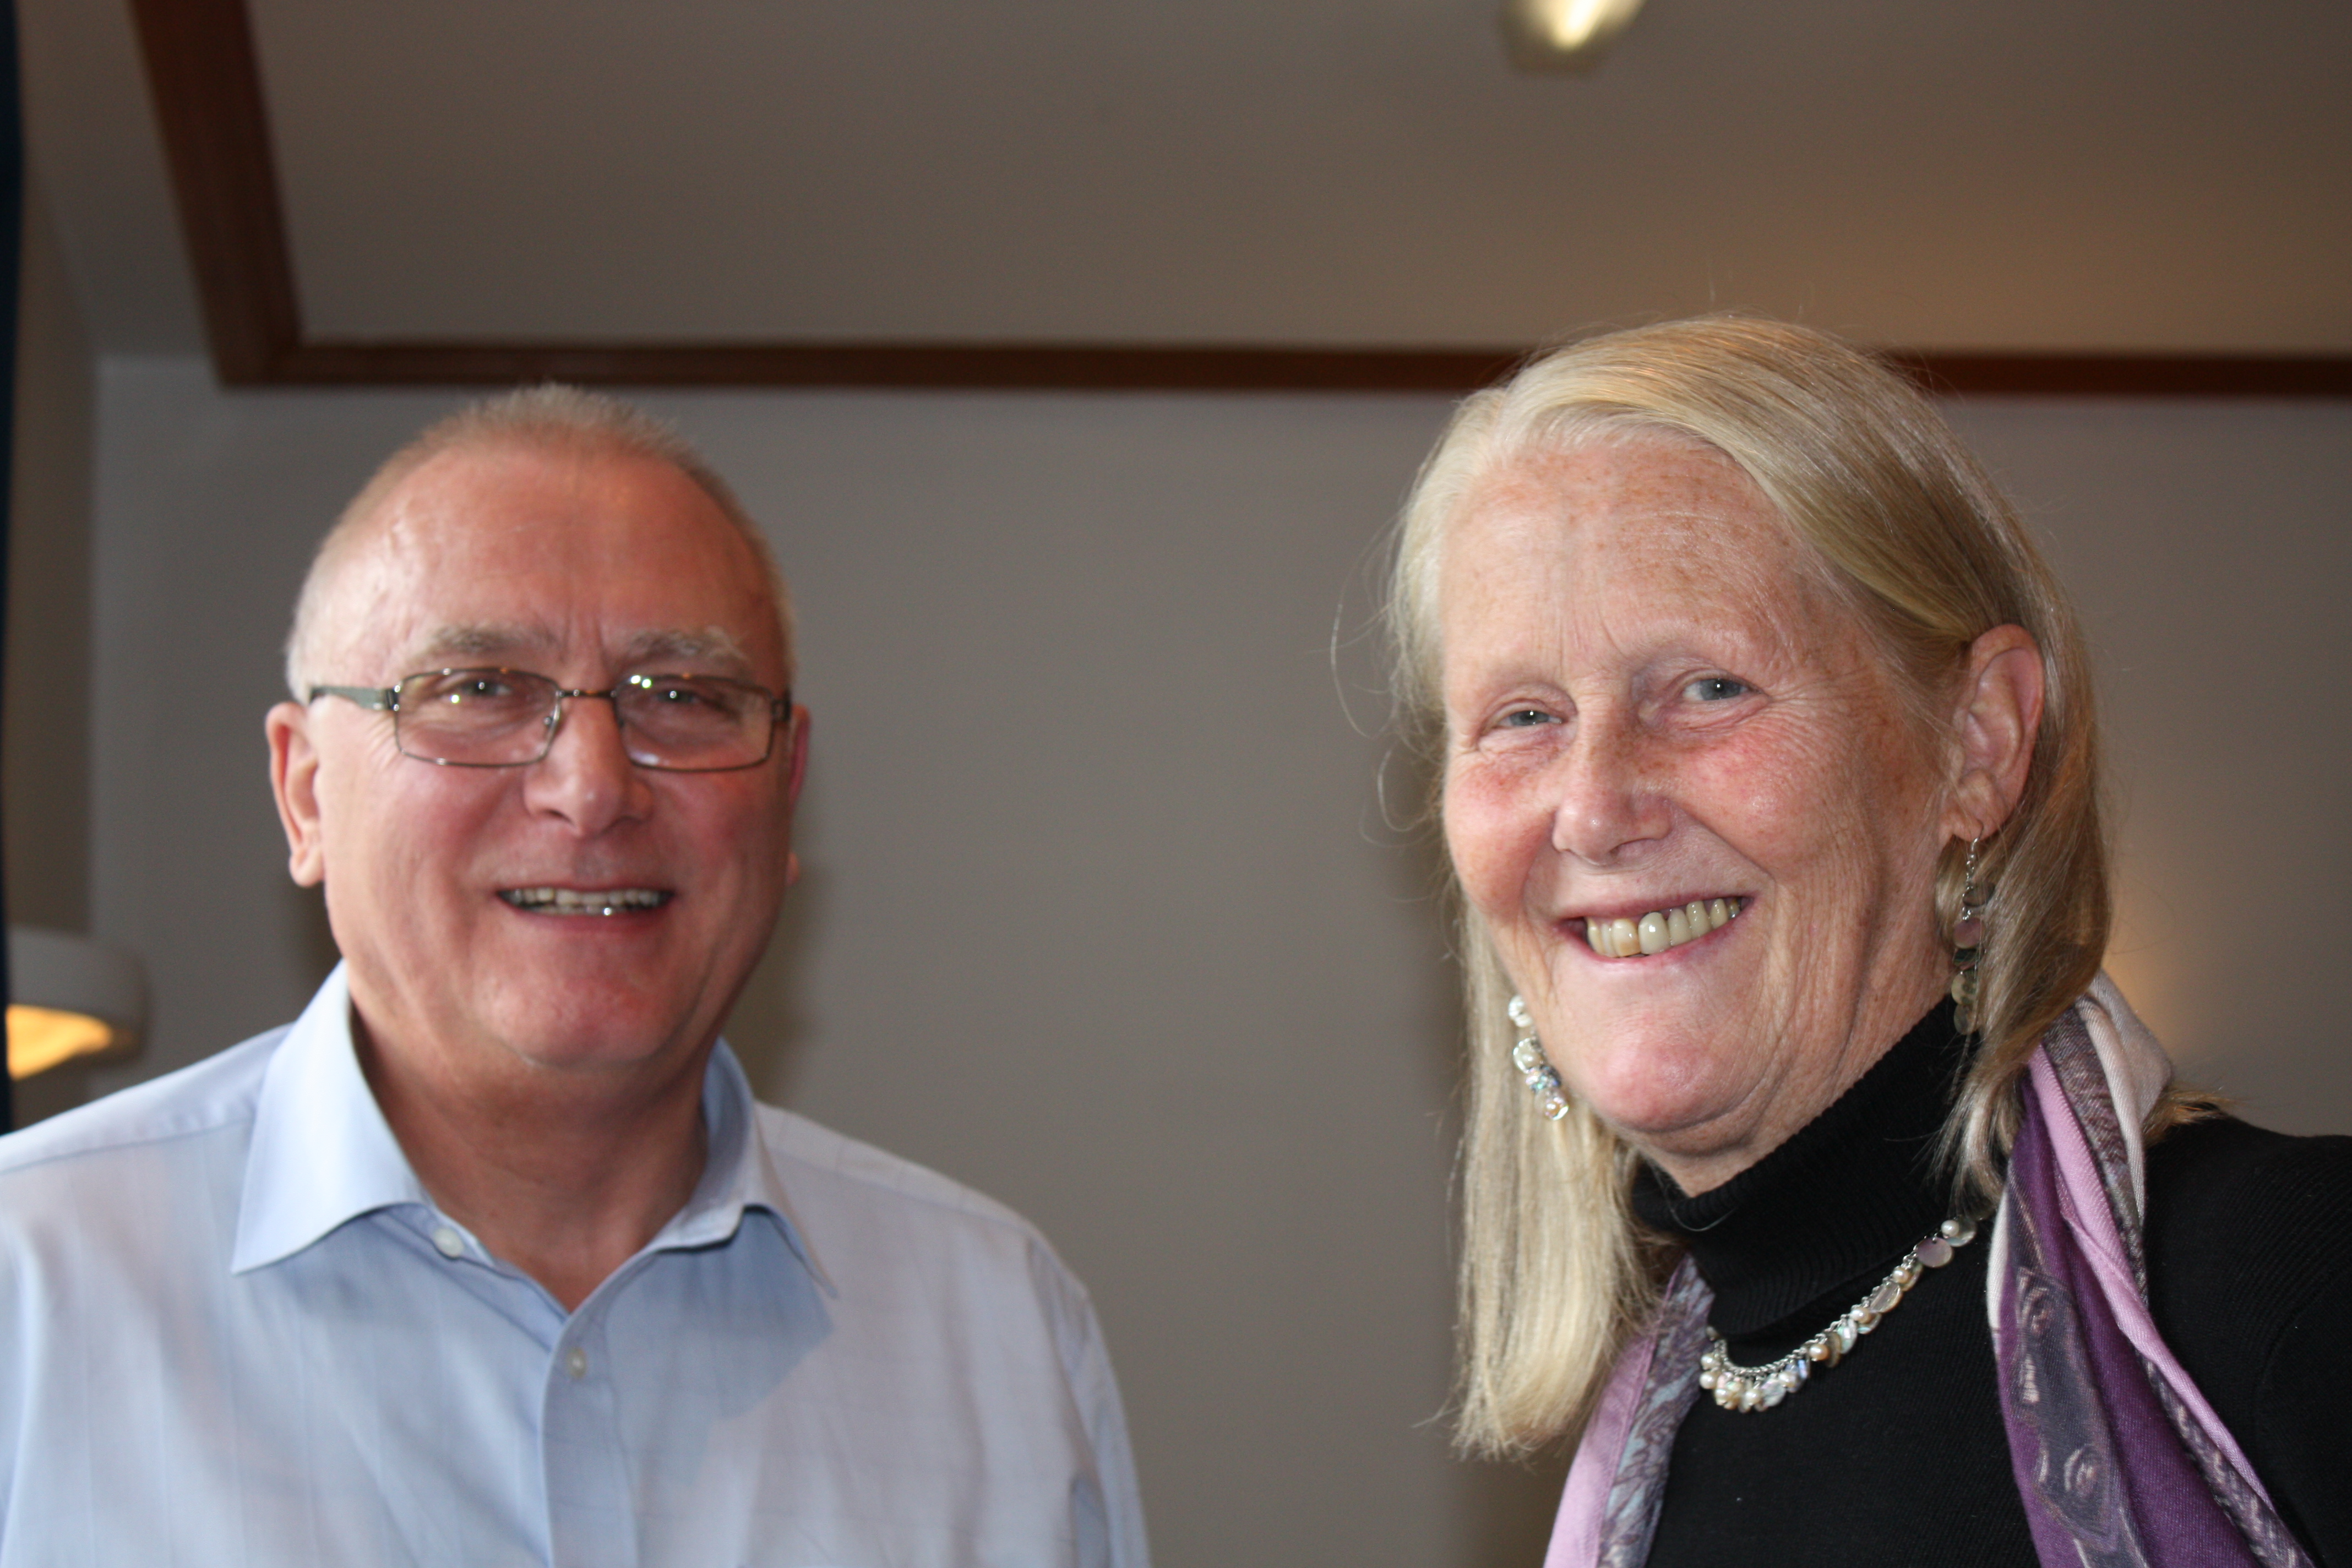 Bob and Daphne Paterson have been friends of Alistair since their teenage years.